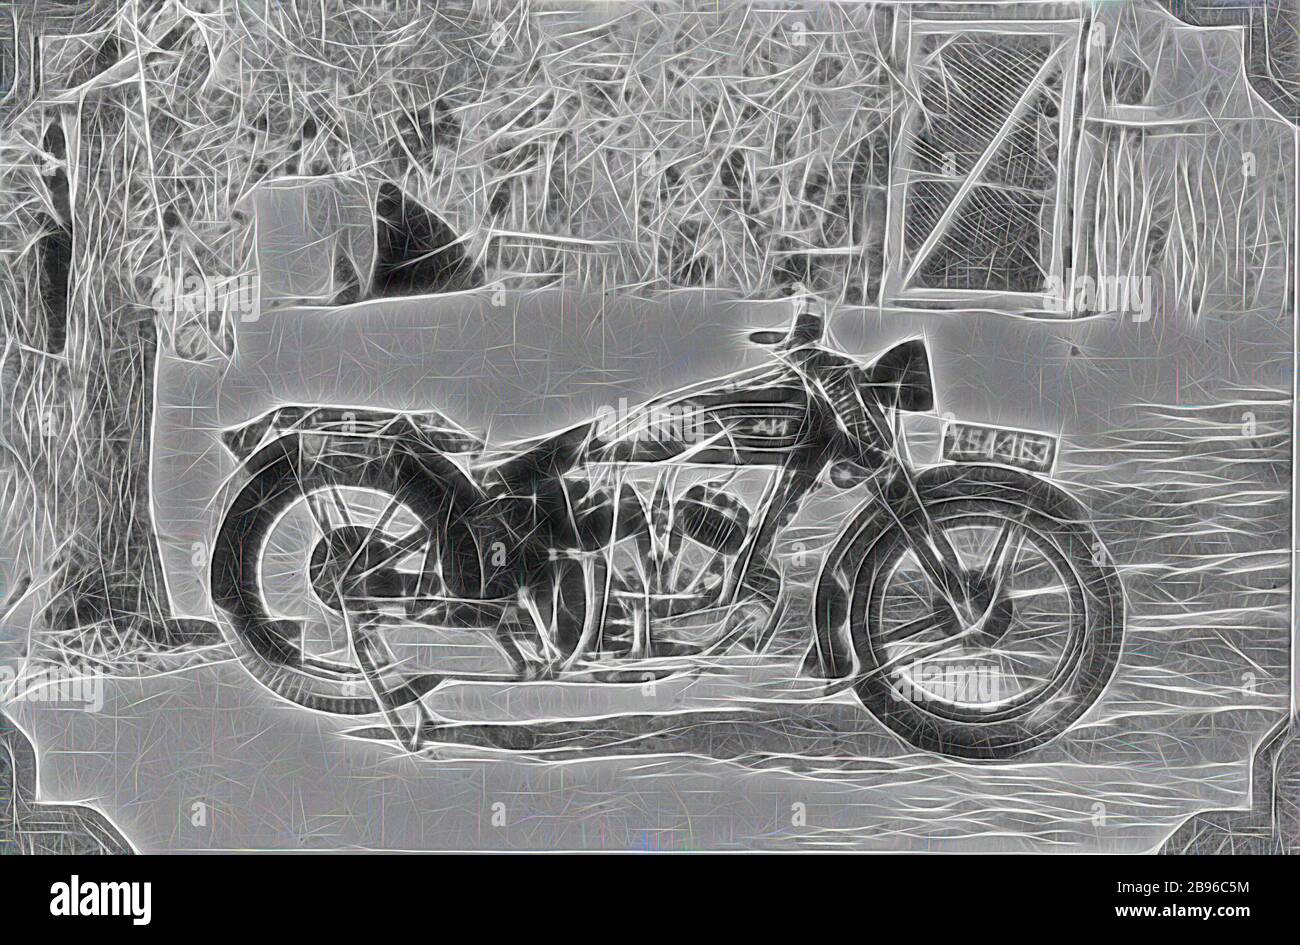 Negative - Henbury, Northern Territory, 1937, A AJS V-twin motorbike at 'Henbery' station. There is a brush covered building in the background., Reimagined by Gibon, design of warm cheerful glowing of brightness and light rays radiance. Classic art reinvented with a modern twist. Photography inspired by futurism, embracing dynamic energy of modern technology, movement, speed and revolutionize culture. Stock Photo